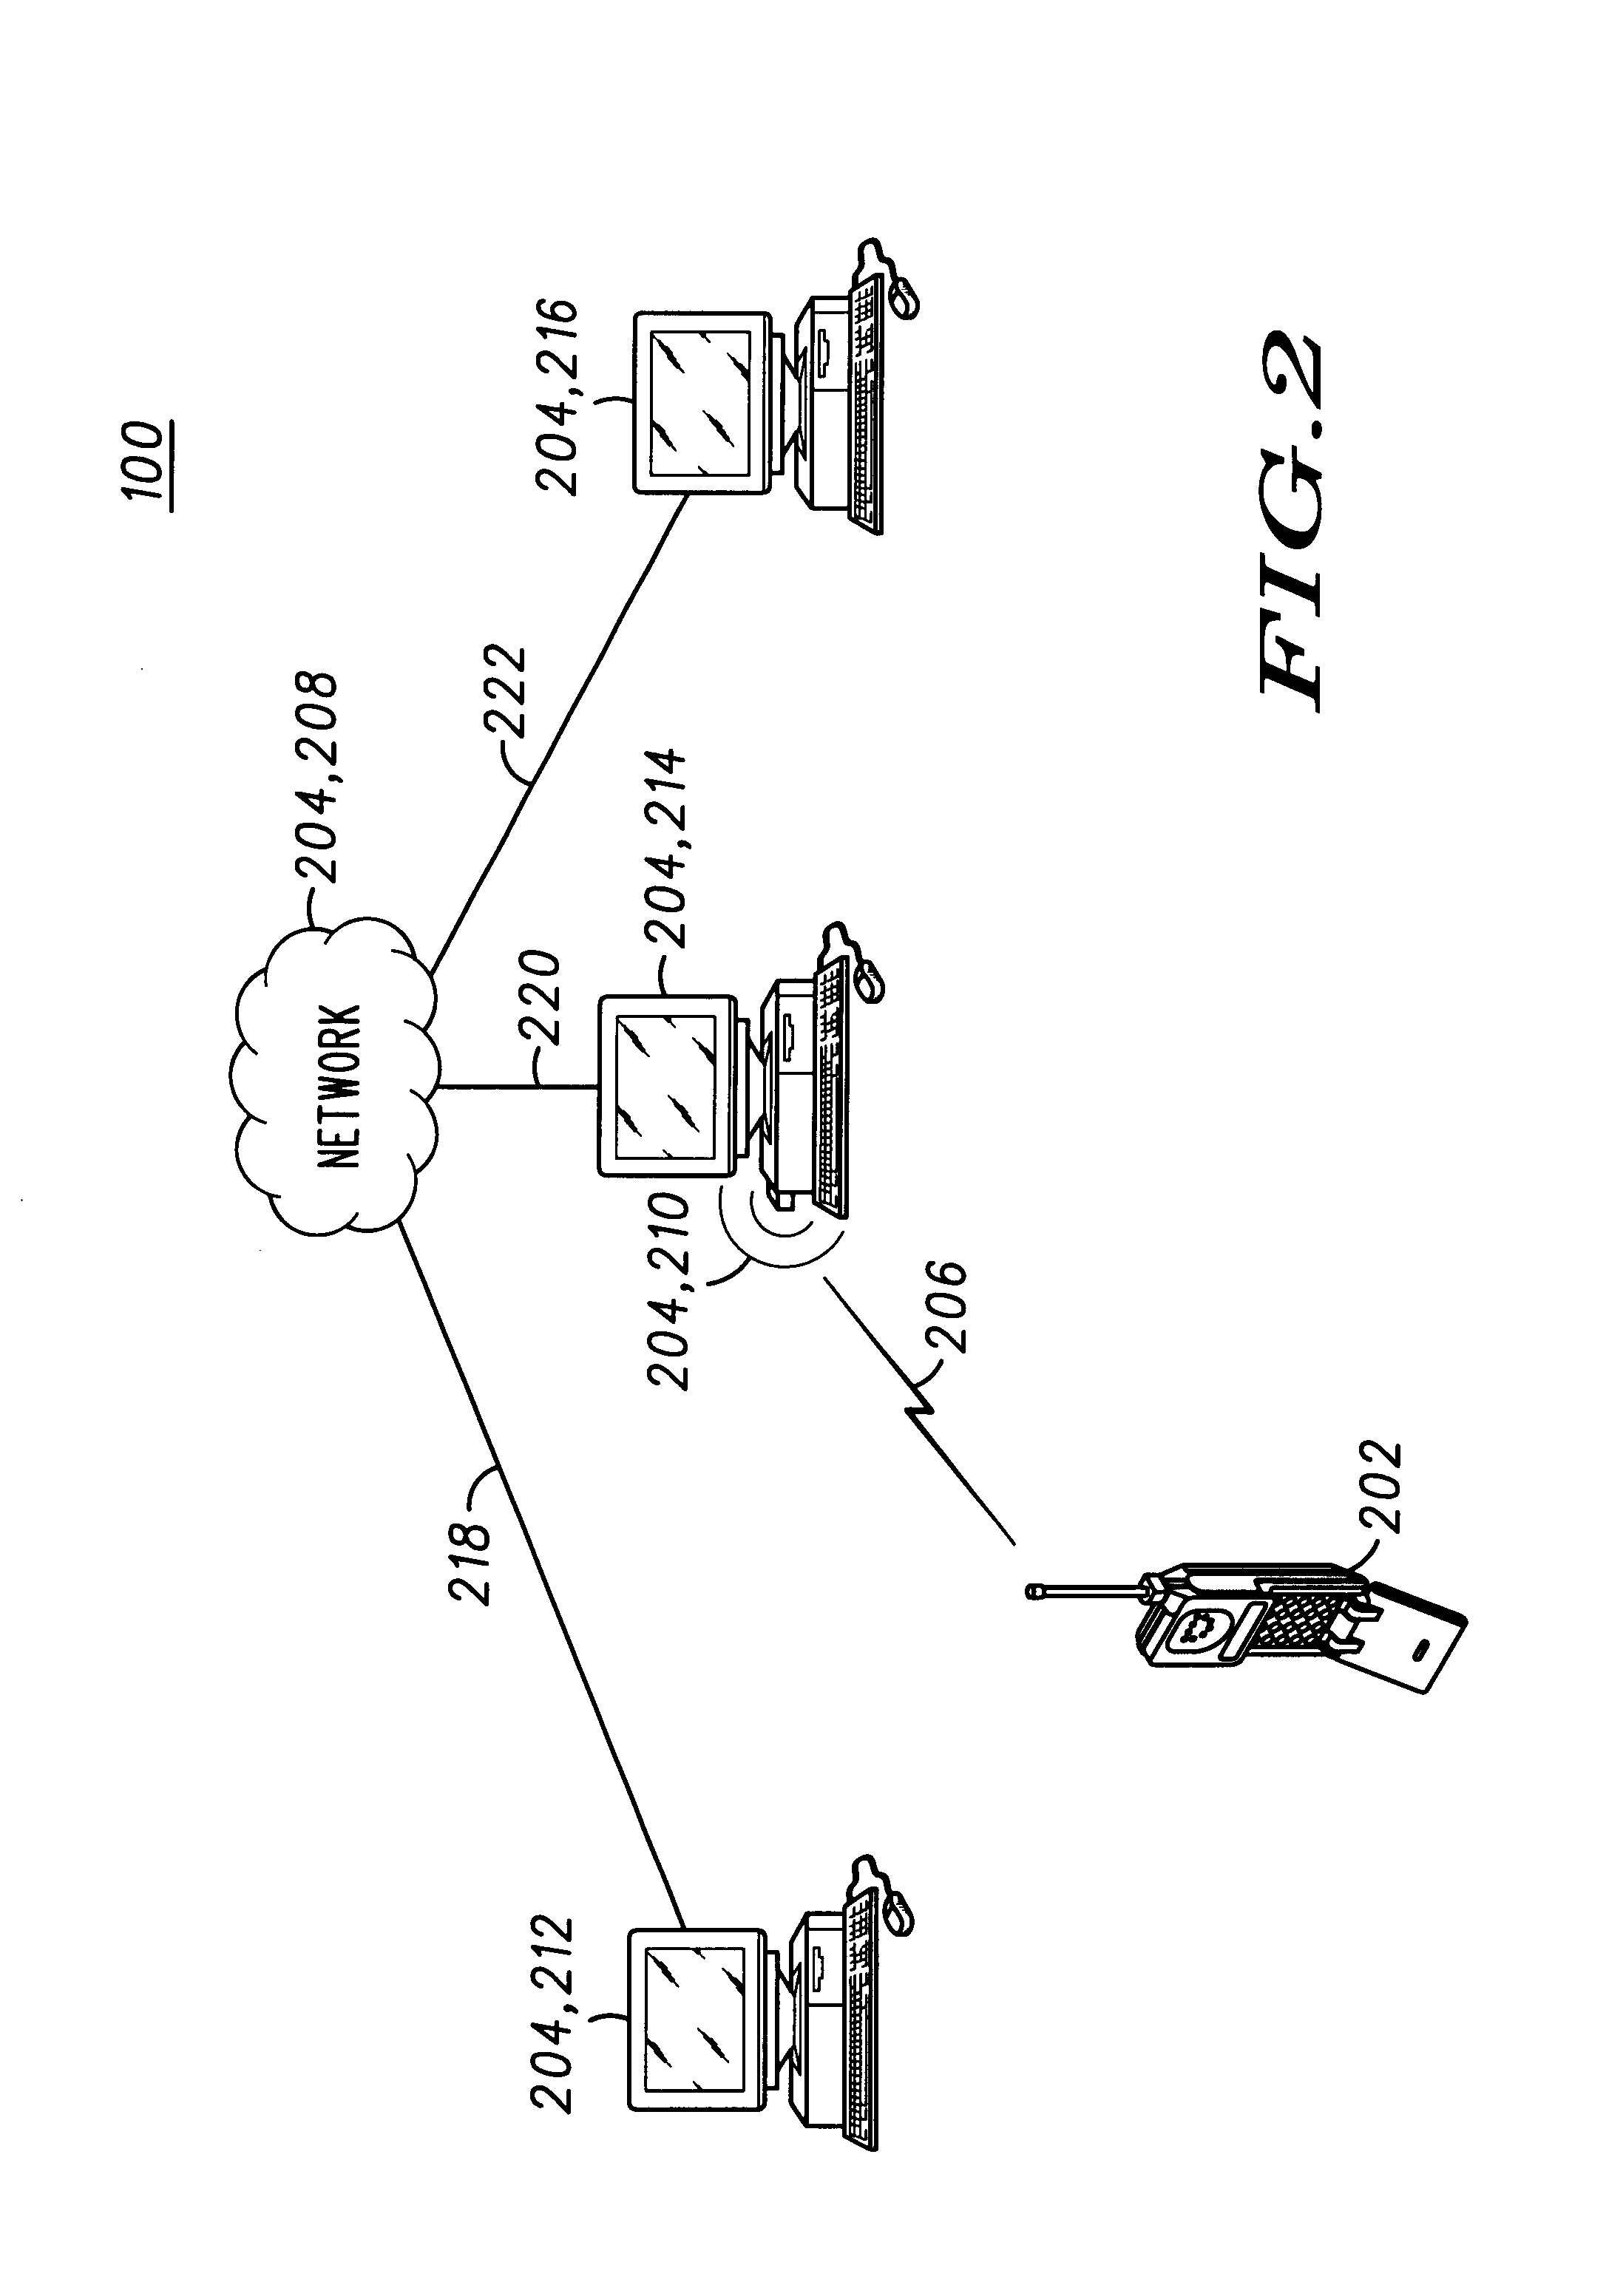 Method and apparatus for splitting control and media content from a cellular network connection